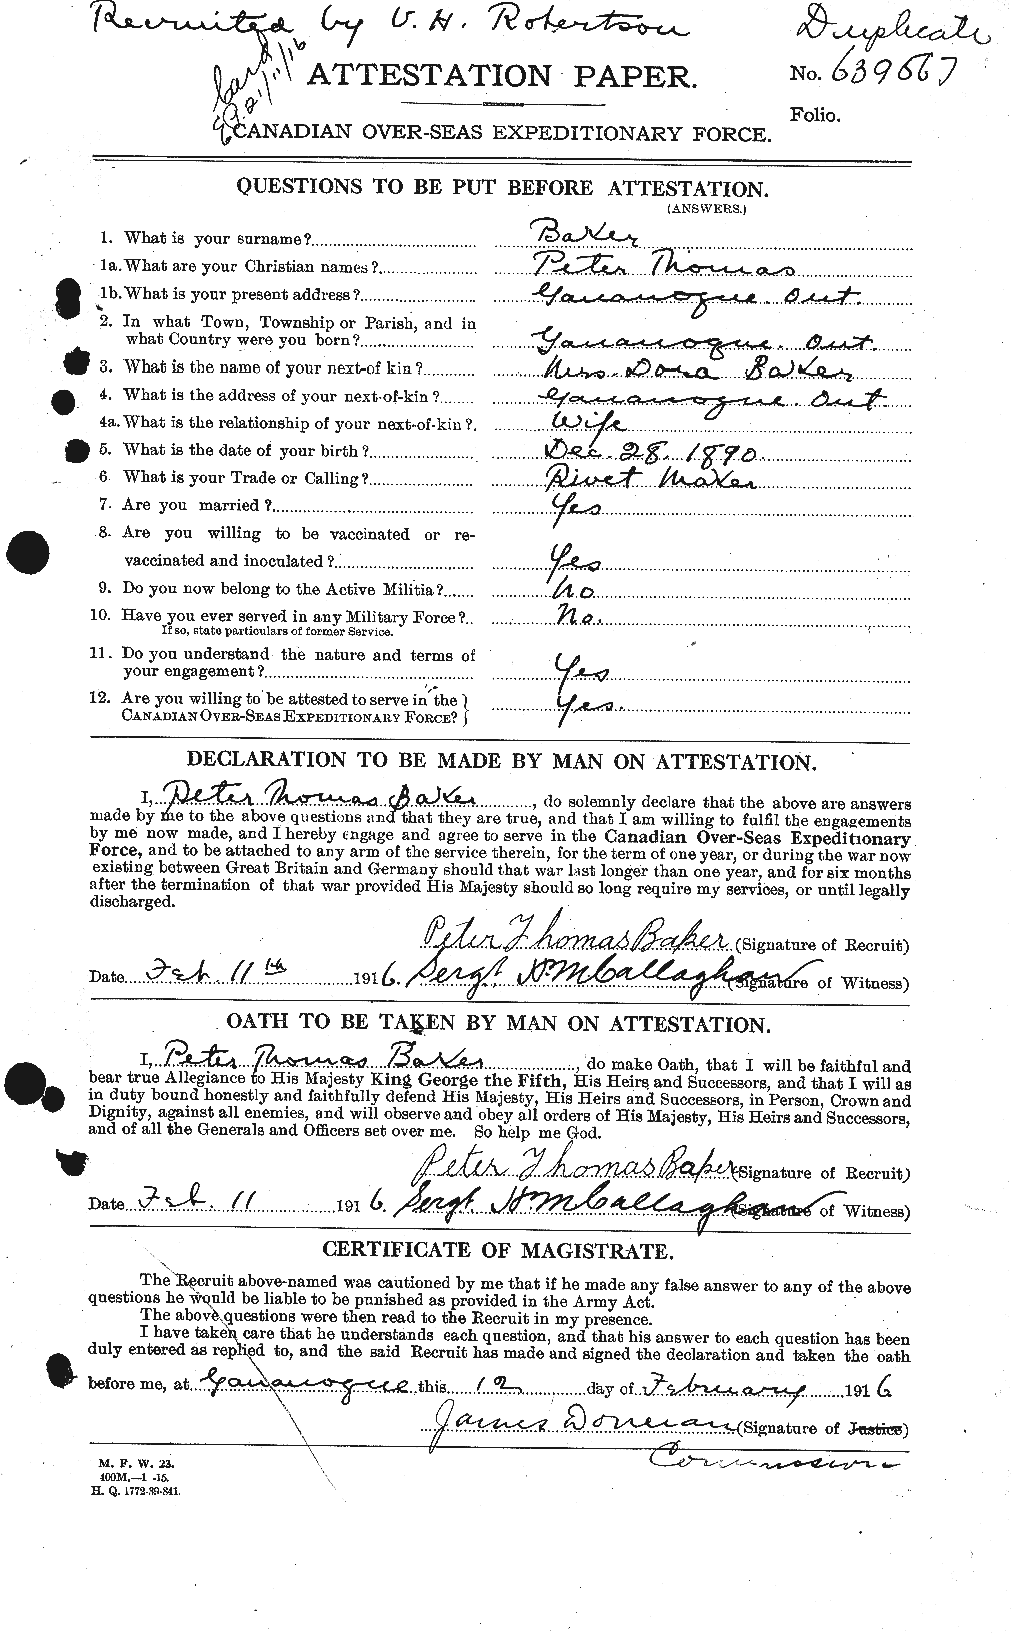 Personnel Records of the First World War - CEF 221562a